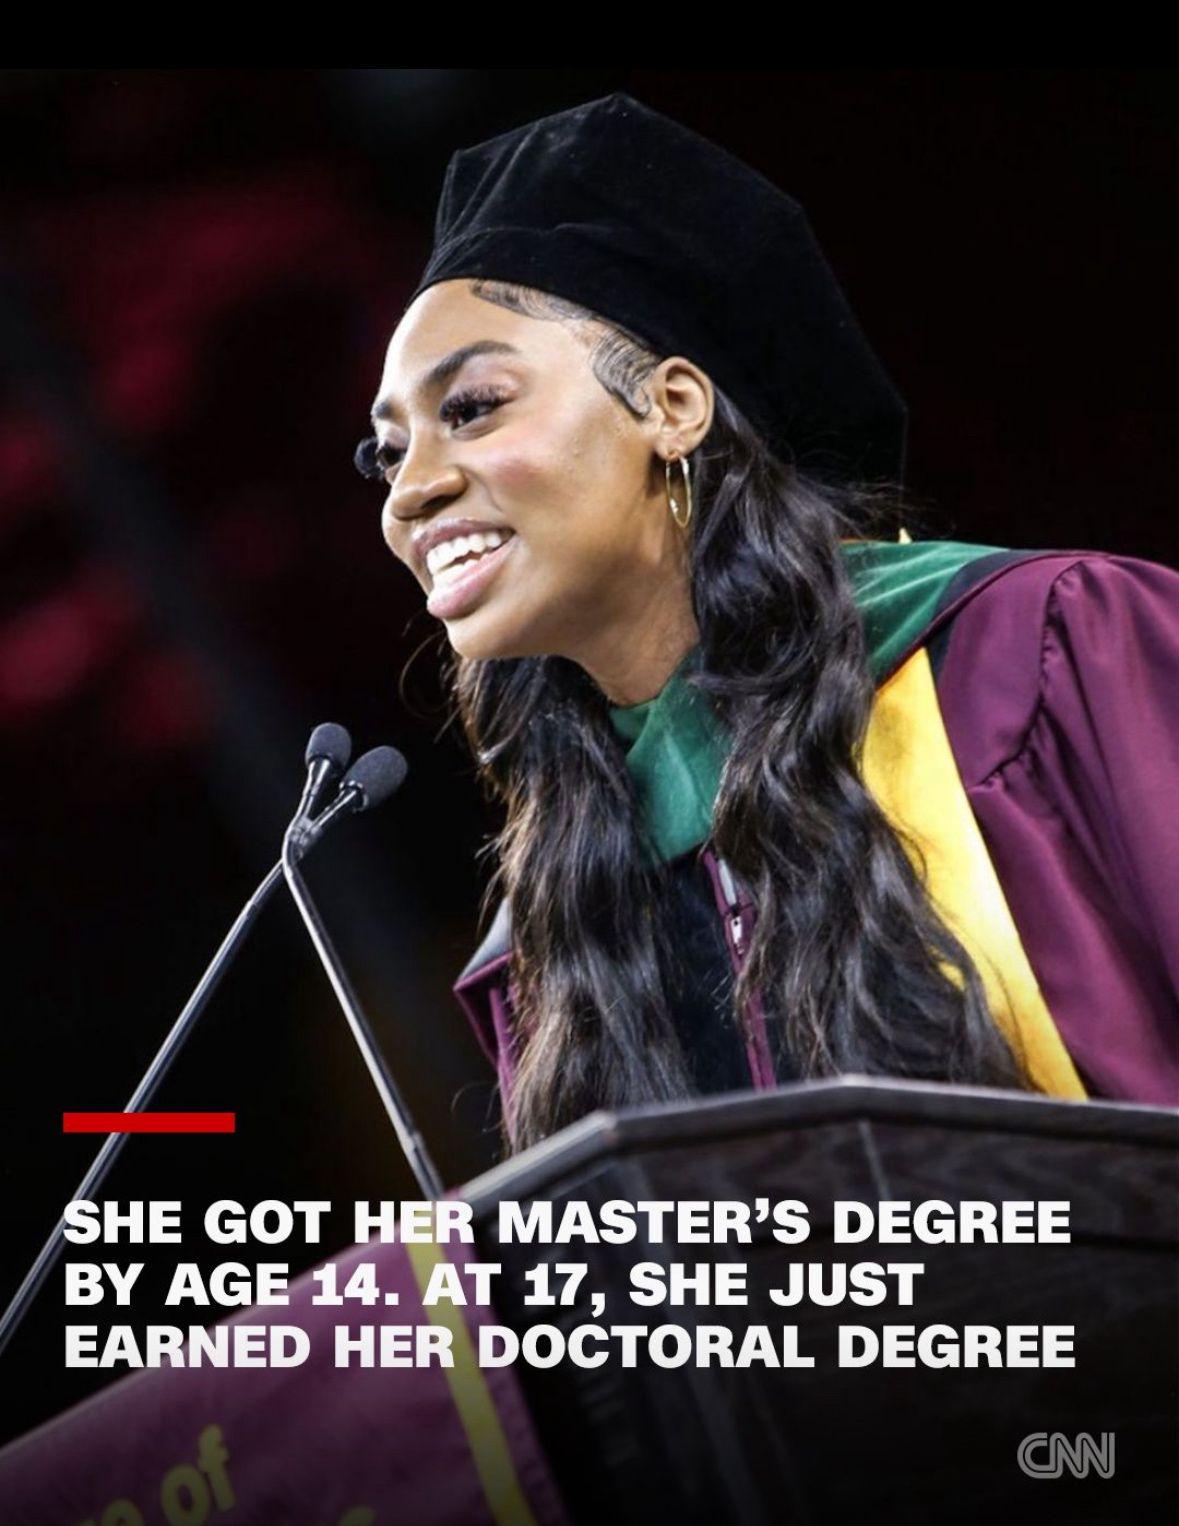 r/BeAmazed - 17 Year Old Earns A Doctorate Degree